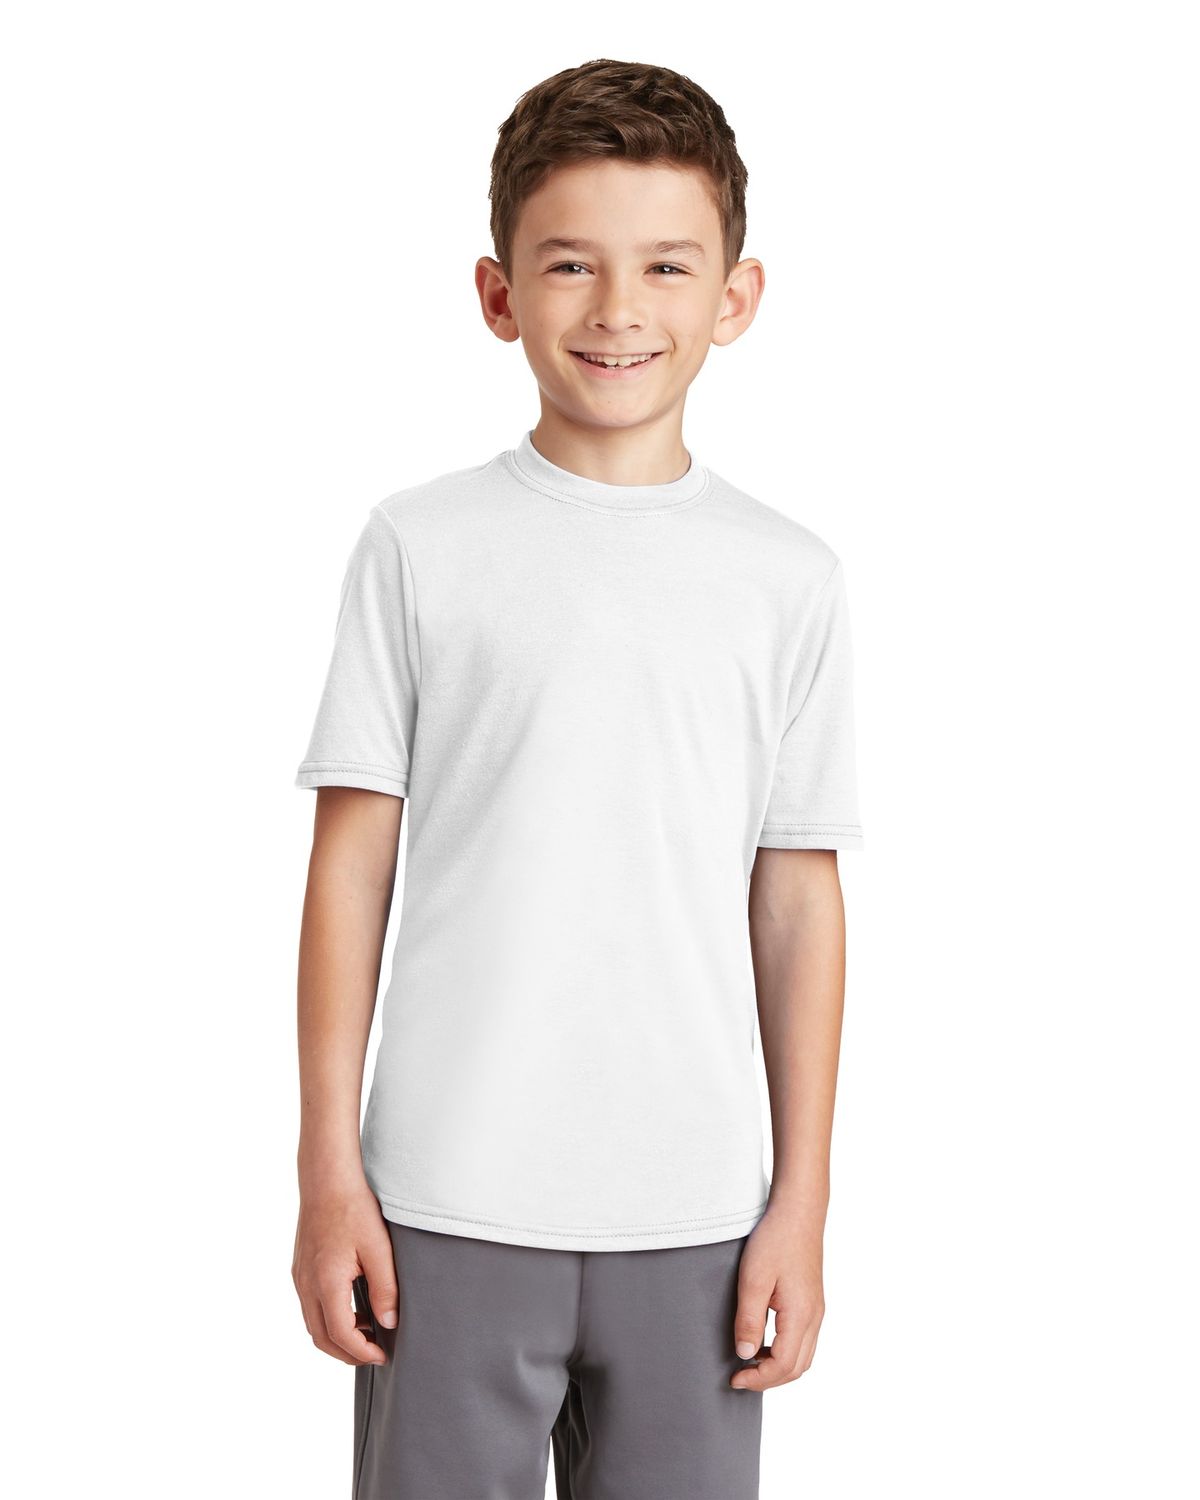 'Port & Company PC381Y Youth Performance Blend Tee'